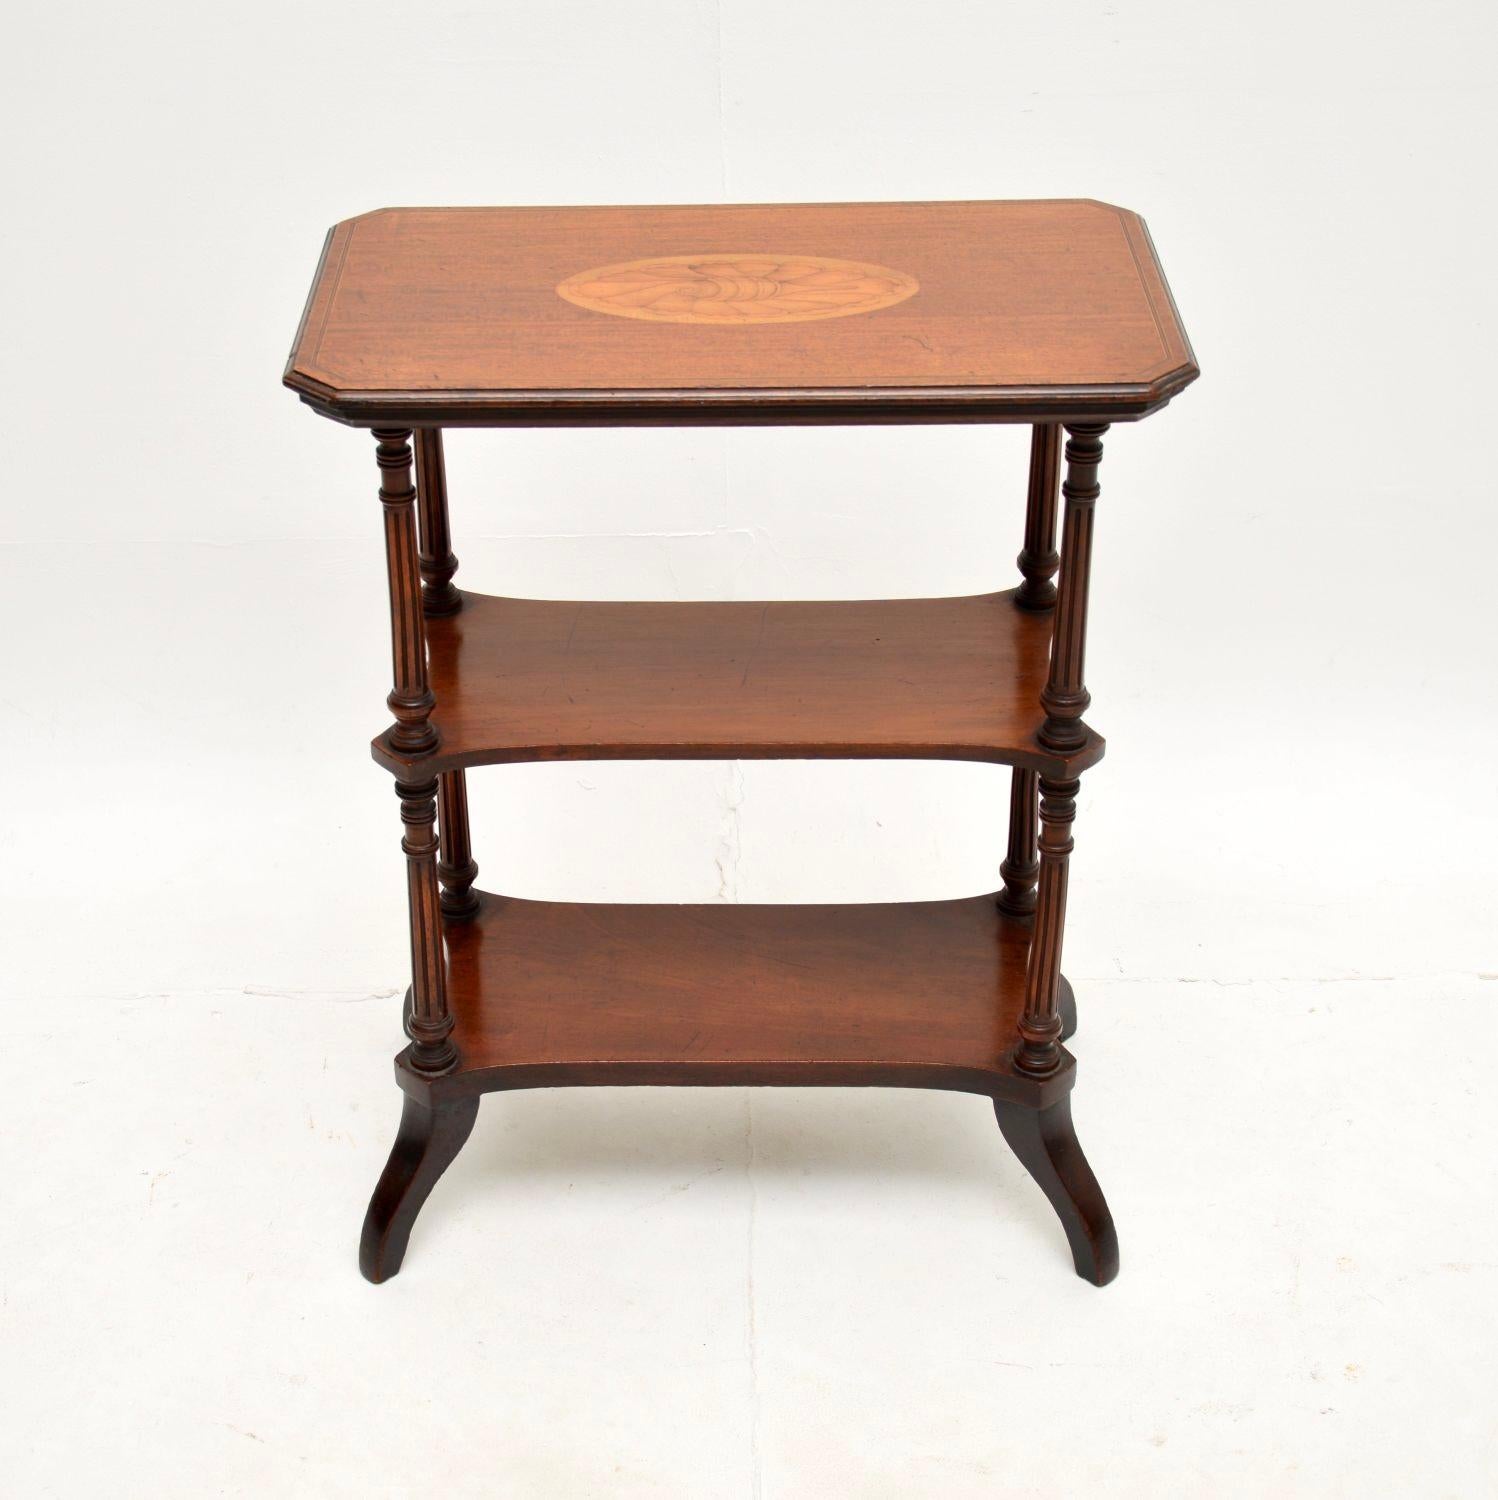 A beautiful antique inlaid three tier side table. This was made in England, it dates from around the 1880-90 period.

It is very well made and is a handy size, with three useful tiers. The top tier is beautifully inlaid with satinwood and a shell